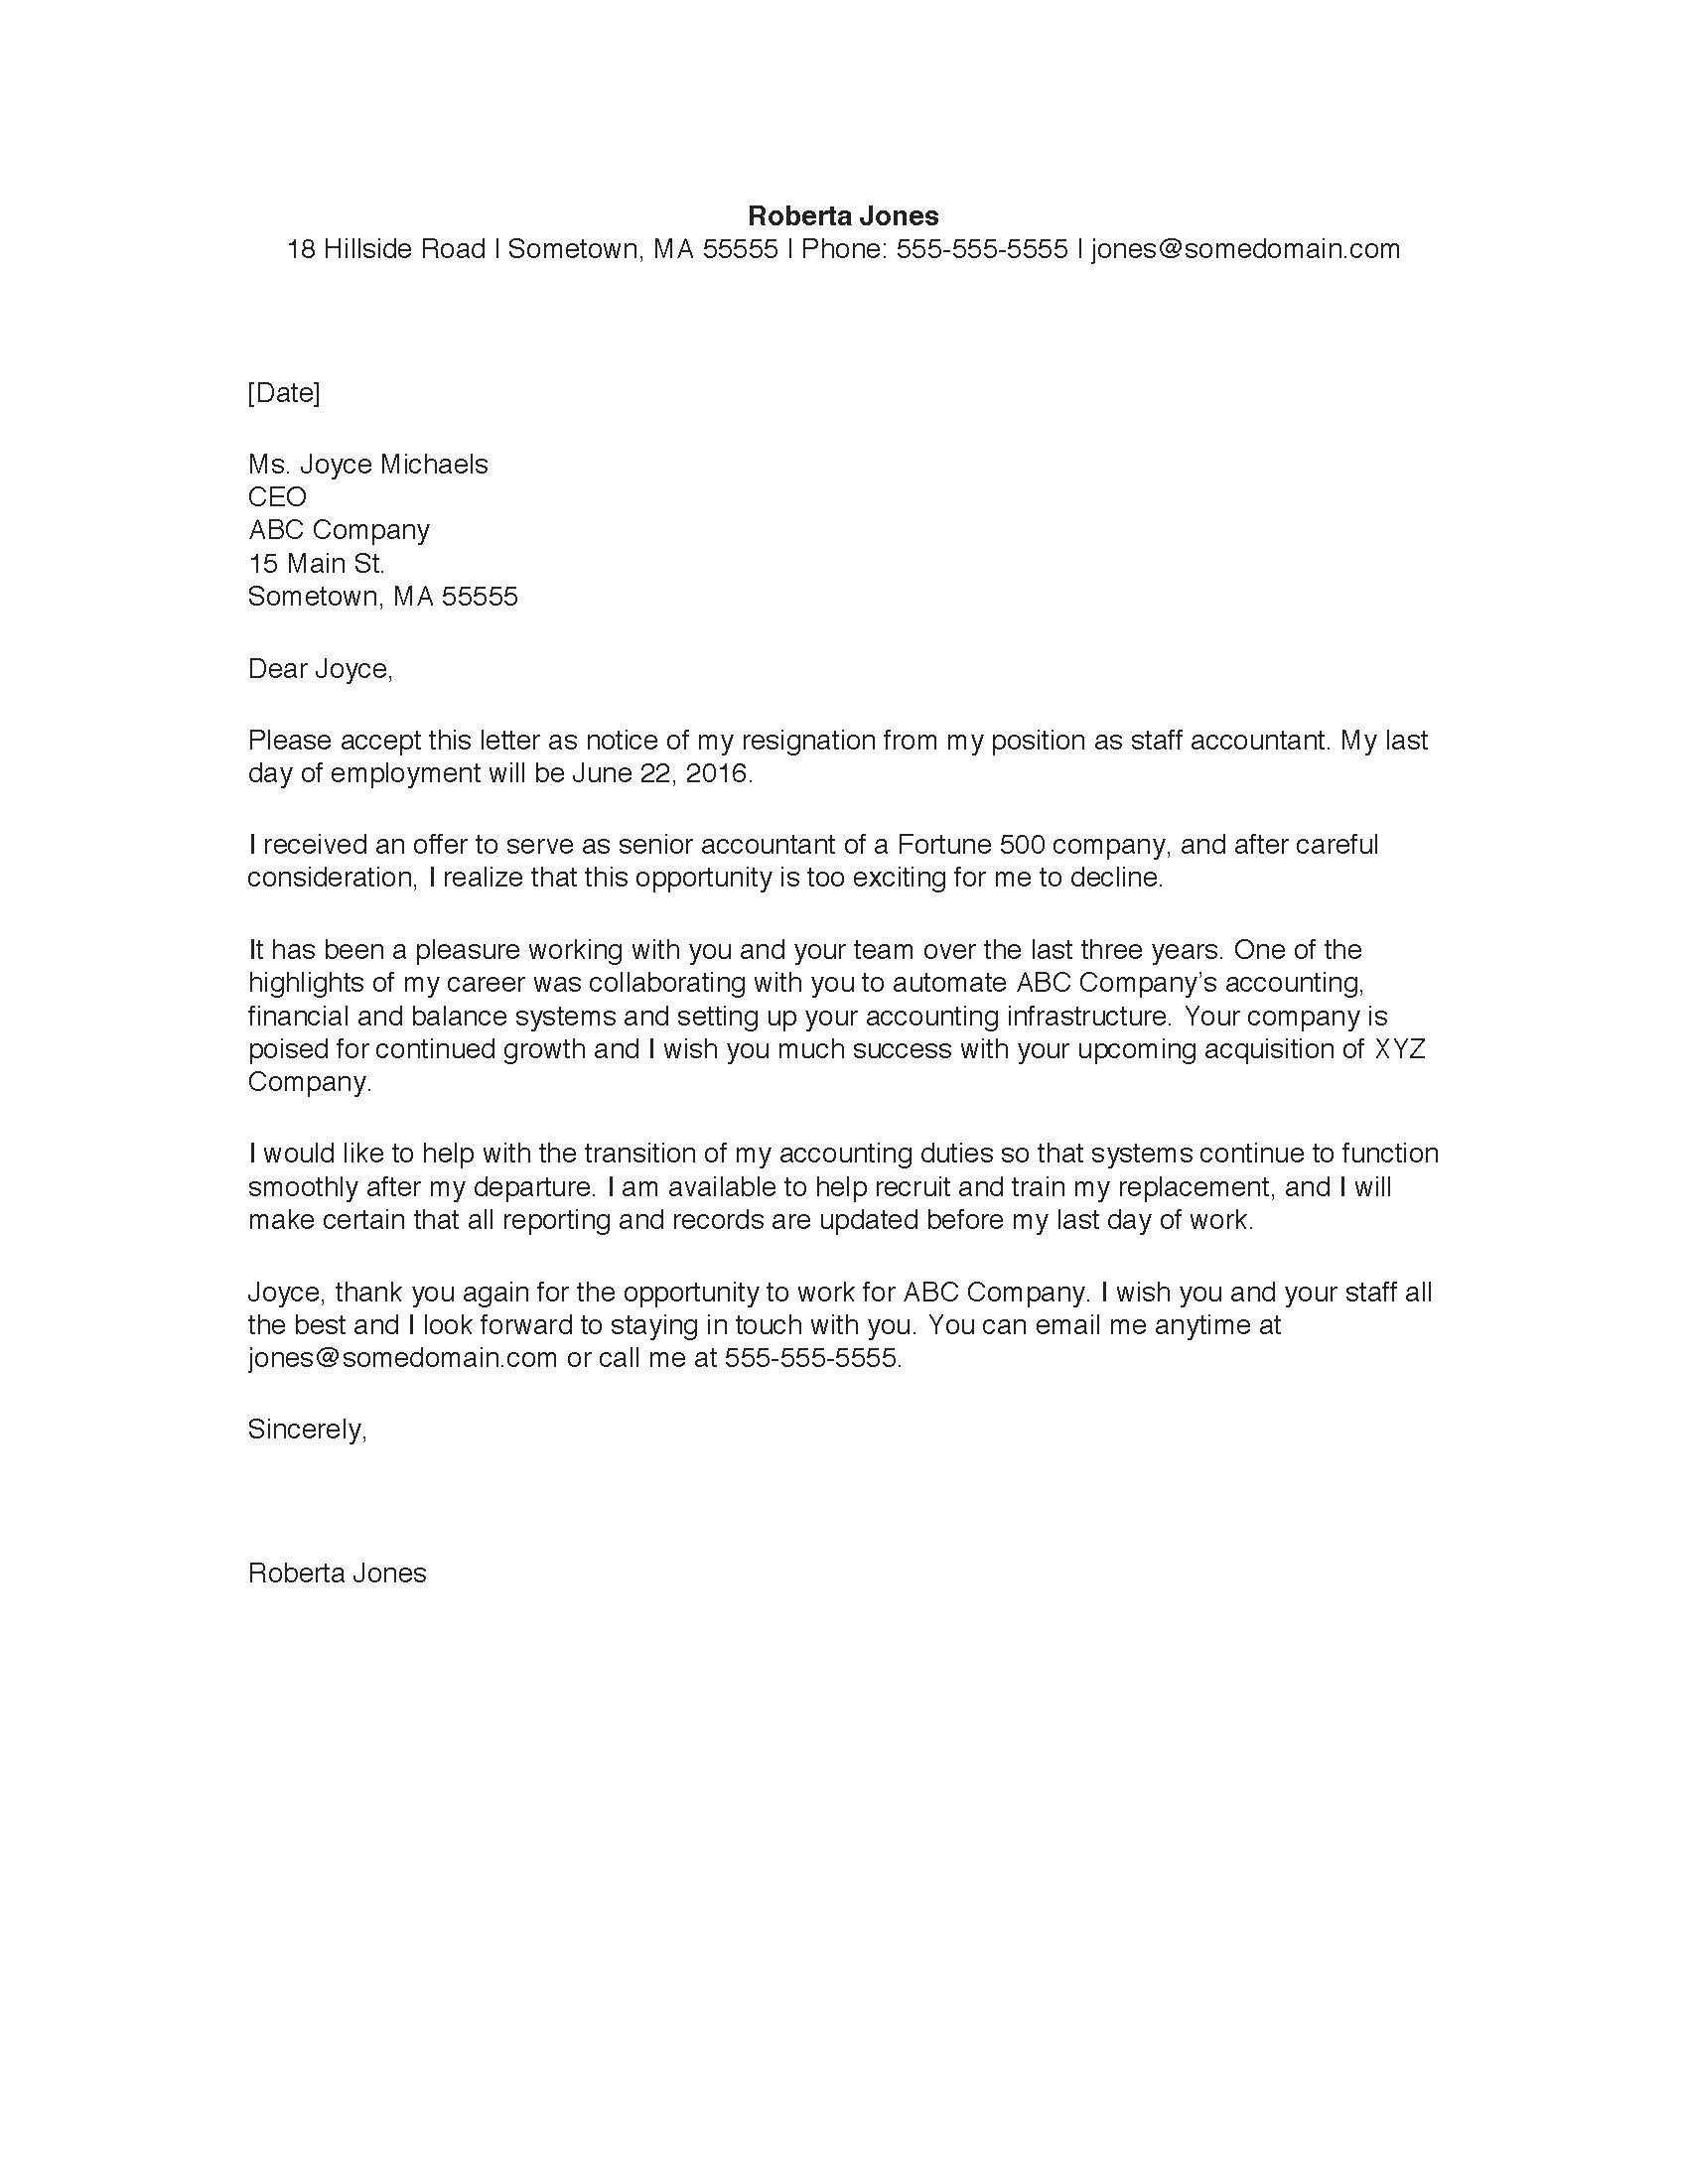 Formal Resignation Letter Template Sample - Pdf, Word pertaining to Involuntary Resignation Letter Template